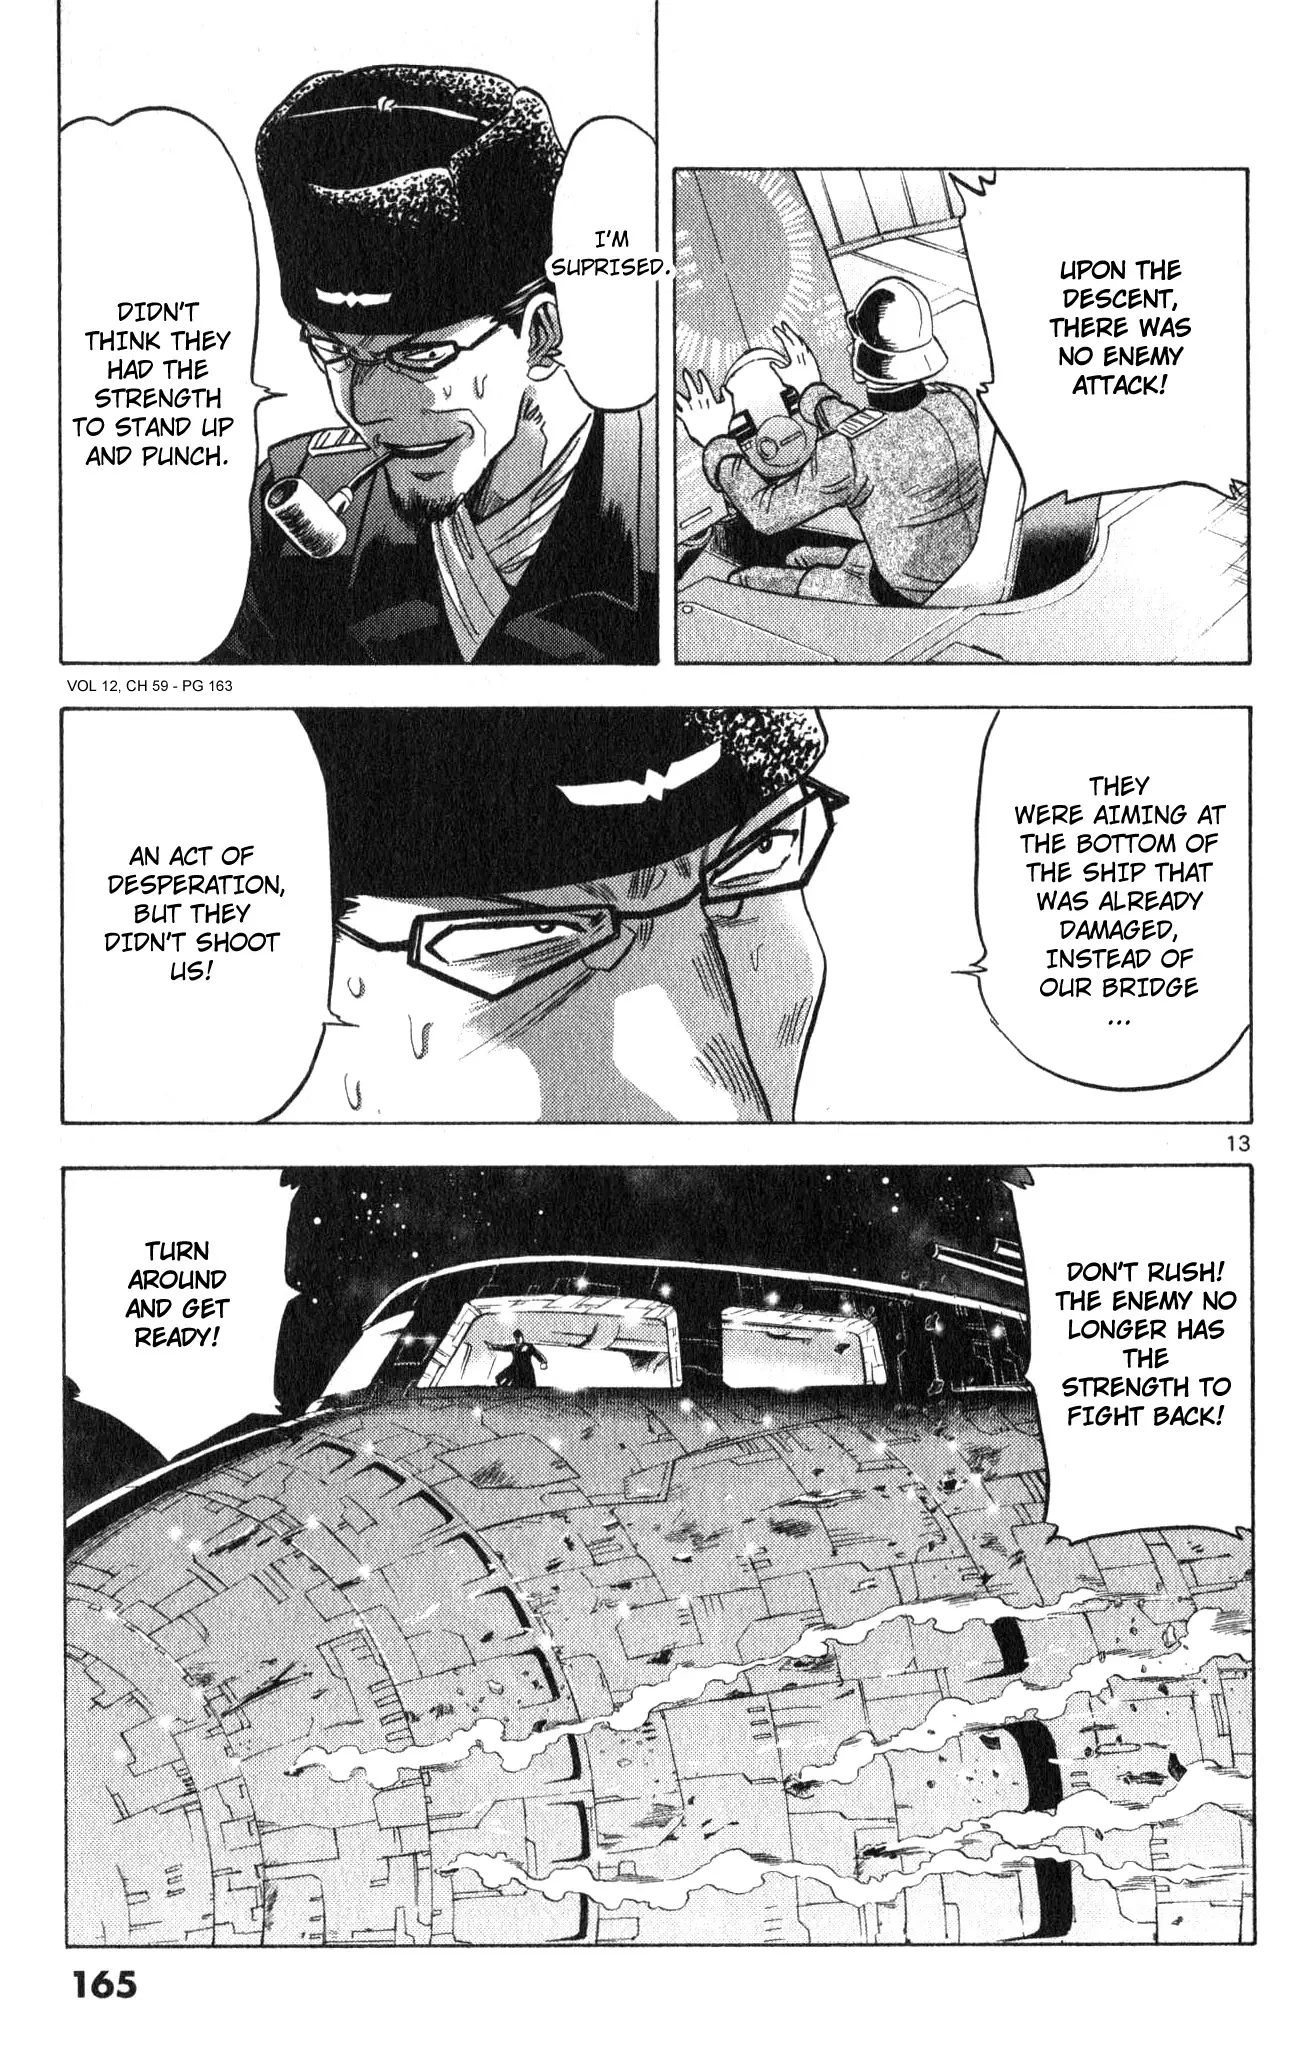 Mobile Suit Gundam Aggressor - 59 page 12-16f344a1